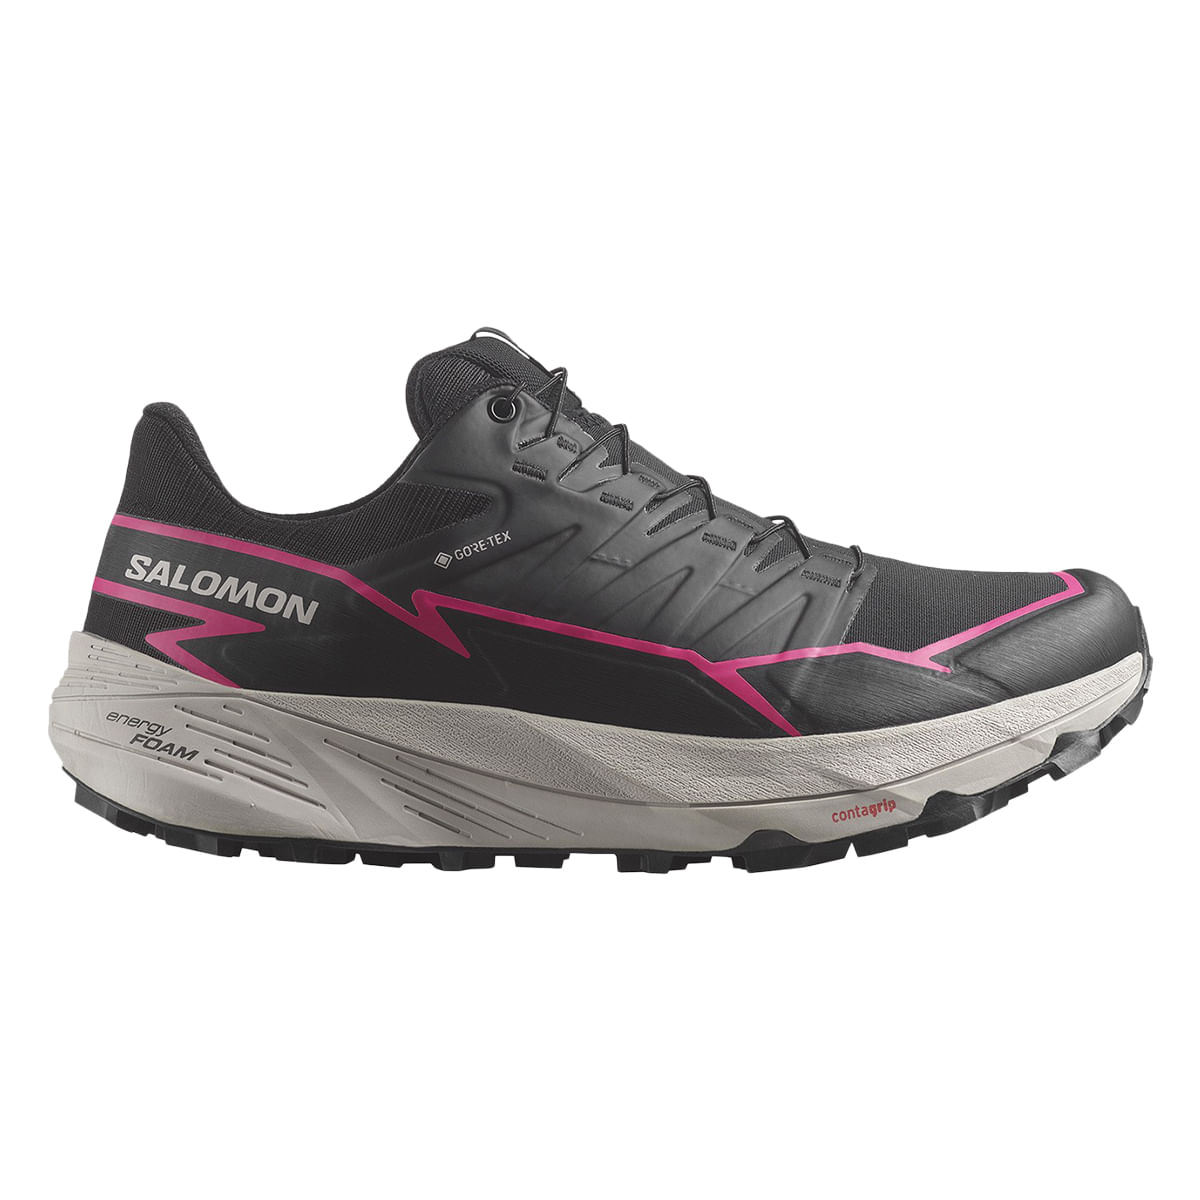 Shop Salomon at NYC's Best Sports Specialty Store for Athletes and 